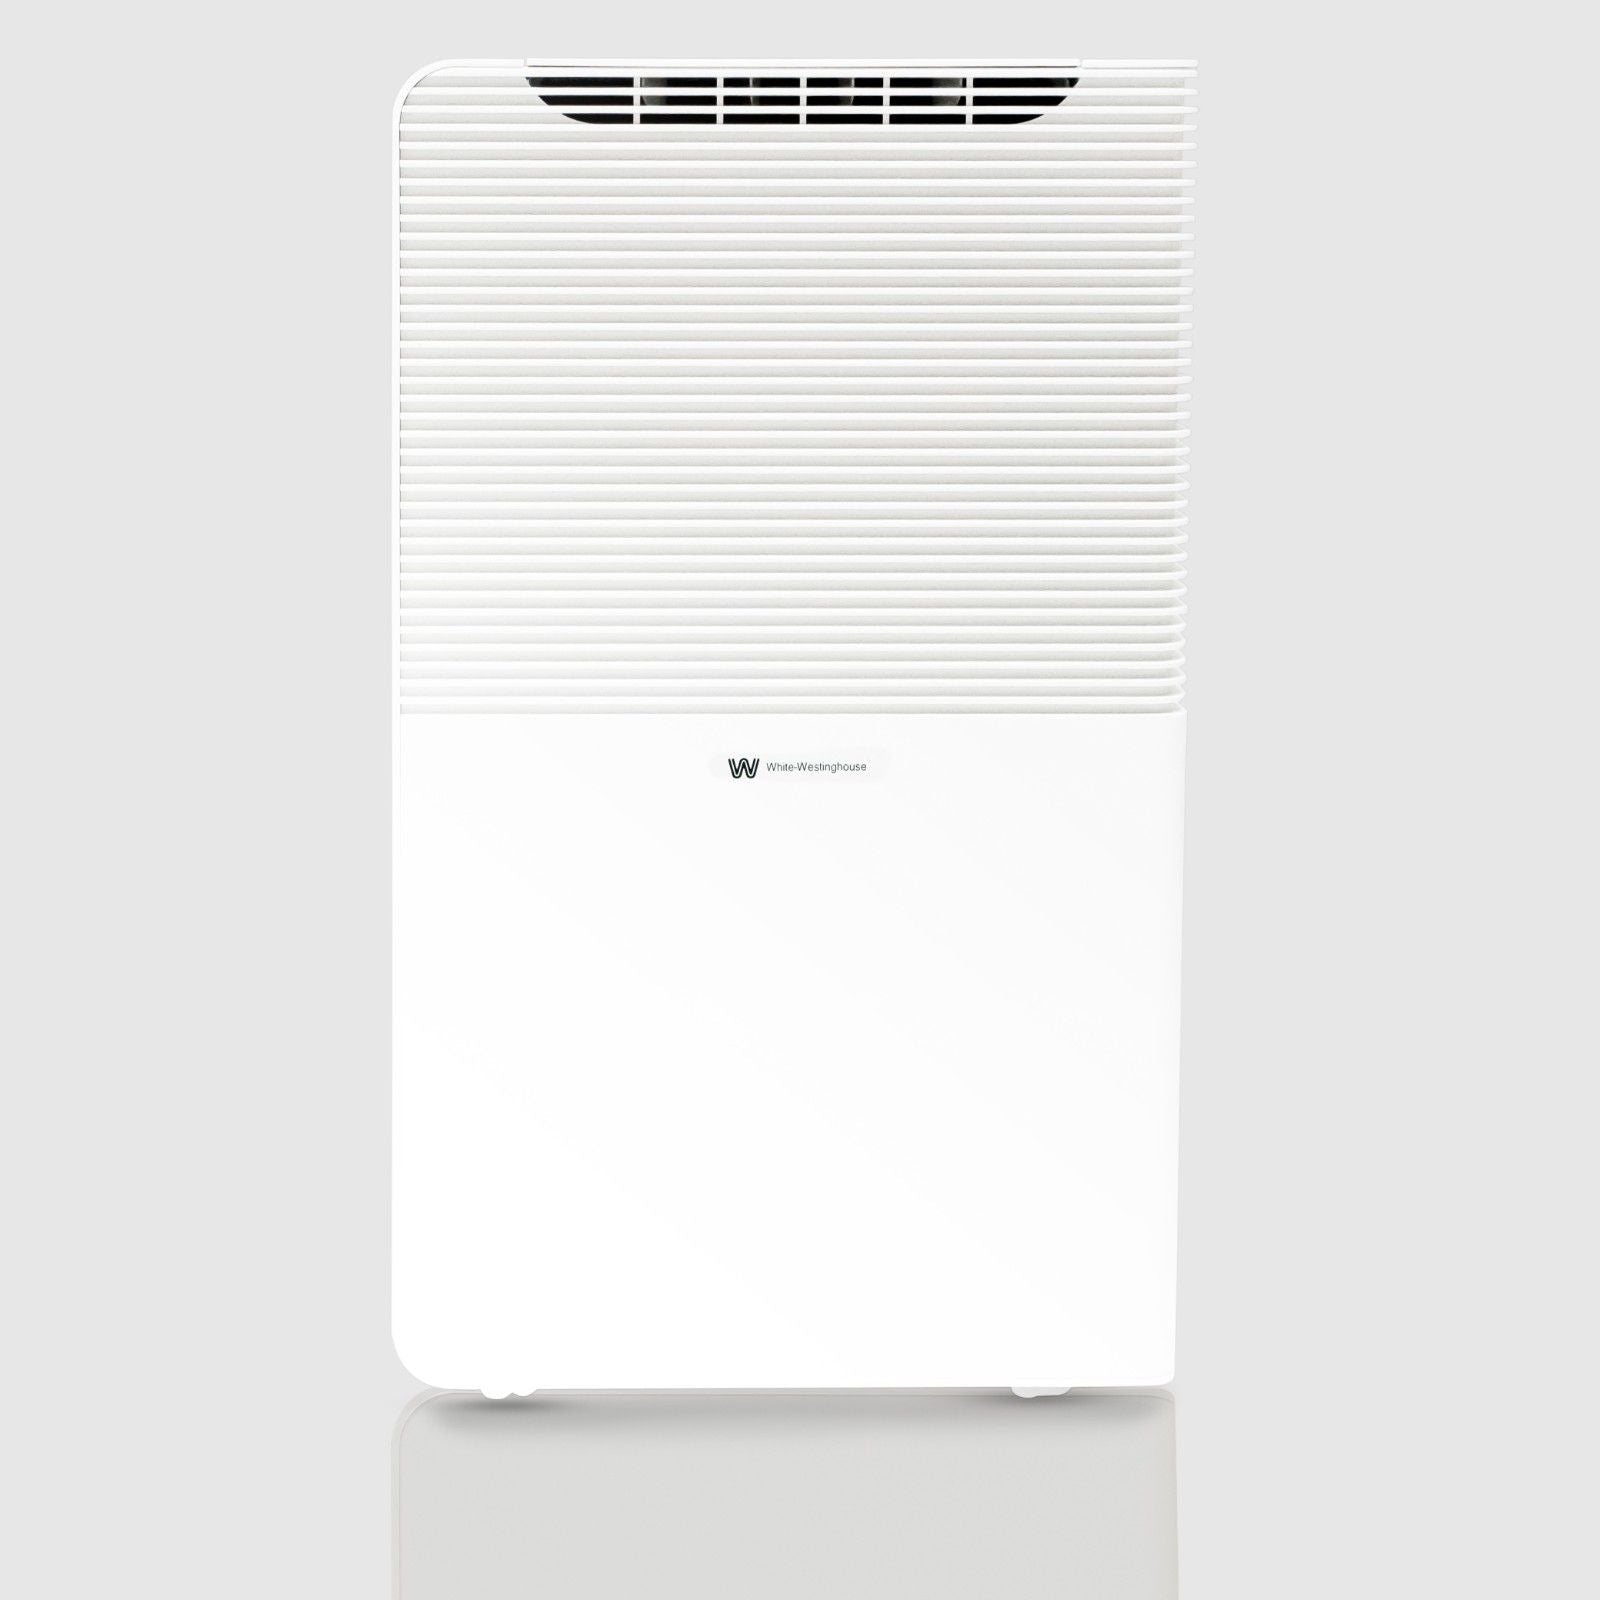 Front view of the White Westinghouse Dehumidifier AWHD50L, showcasing the sleek white design with top air vents. The unit's modern and compact design is ideal for maintaining optimal humidity levels in residential and commercial spaces.